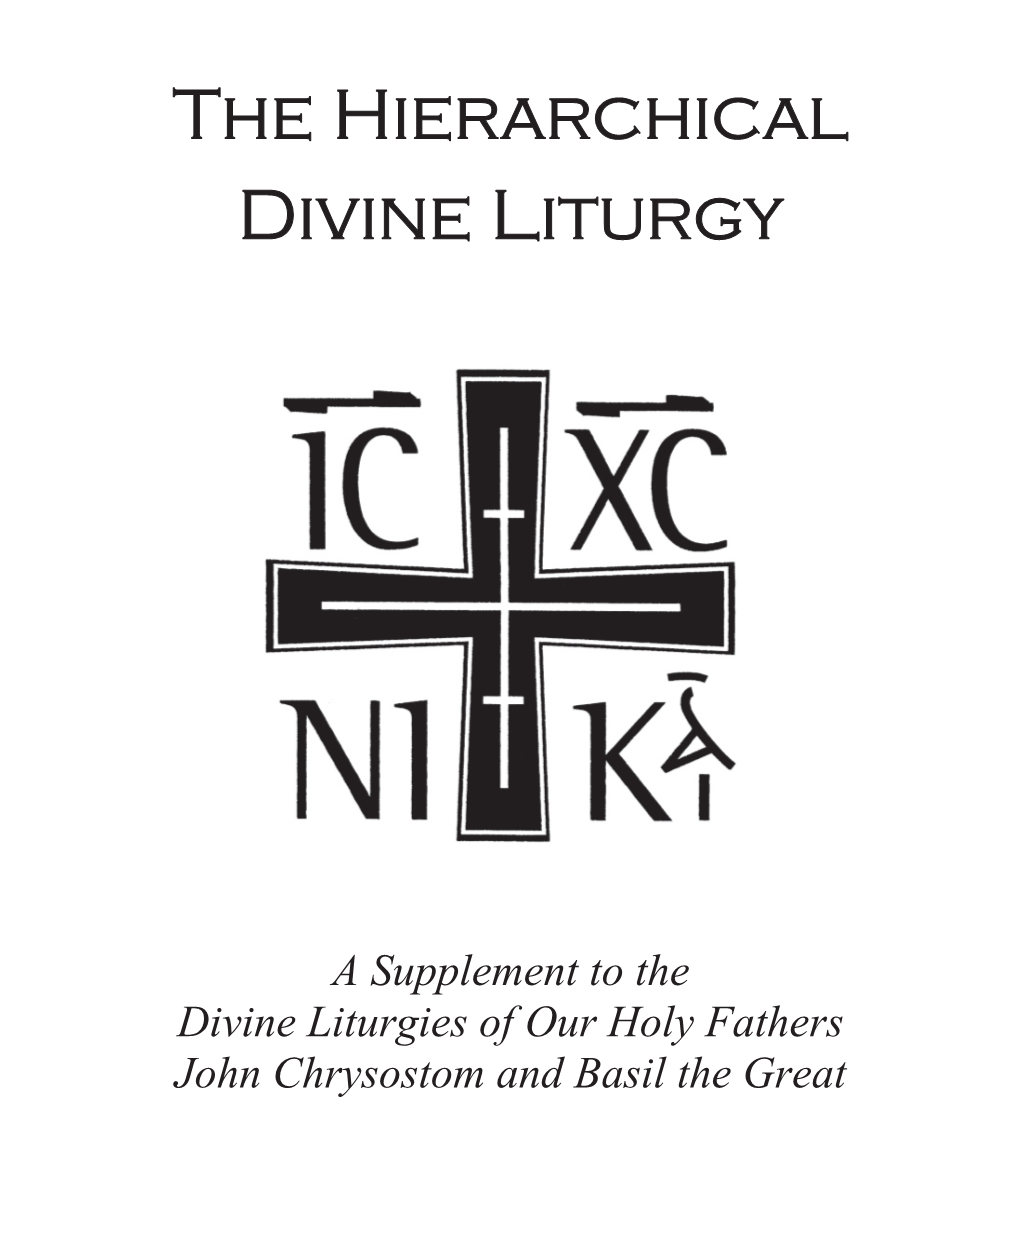 Supplement for the Hierarchical Divine Liturgy